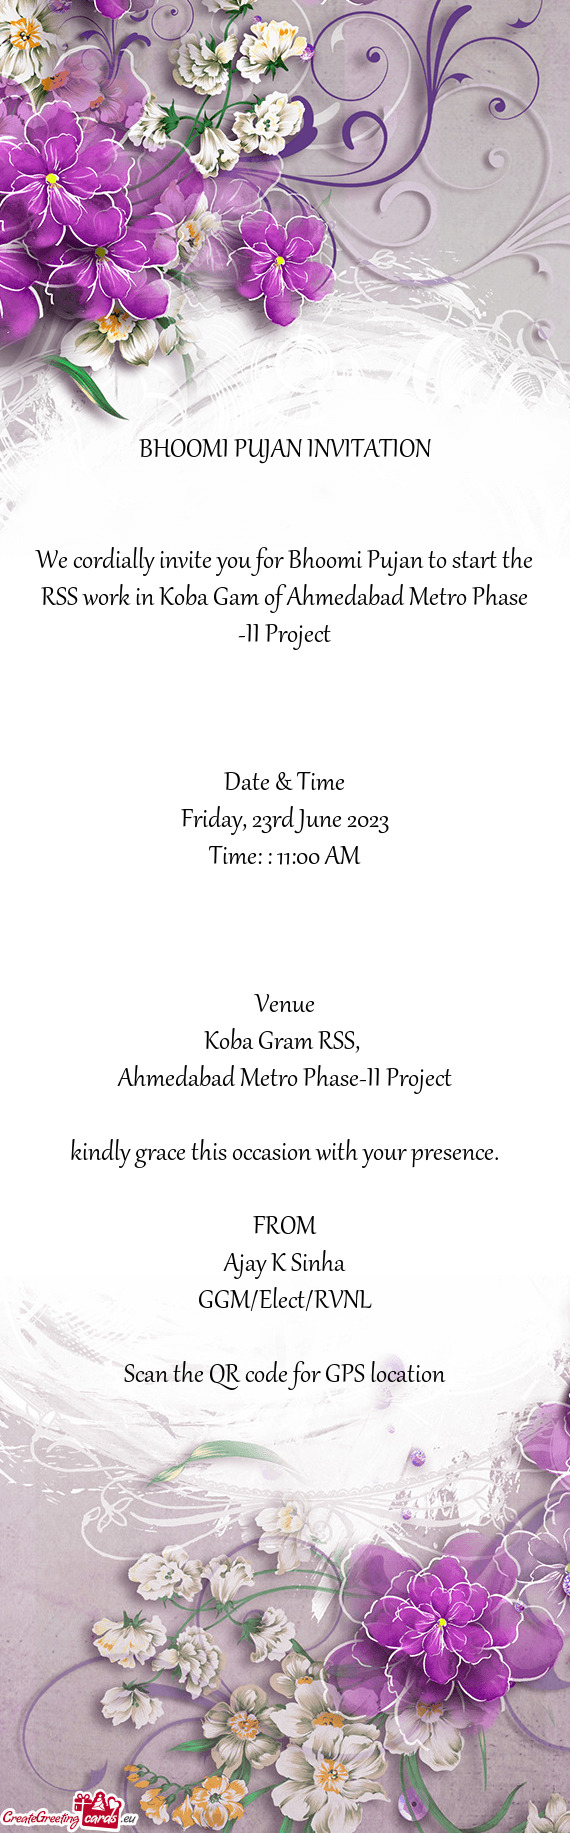 We cordially invite you for Bhoomi Pujan to start the RSS work in Koba Gam of Ahmedabad Metro Phase